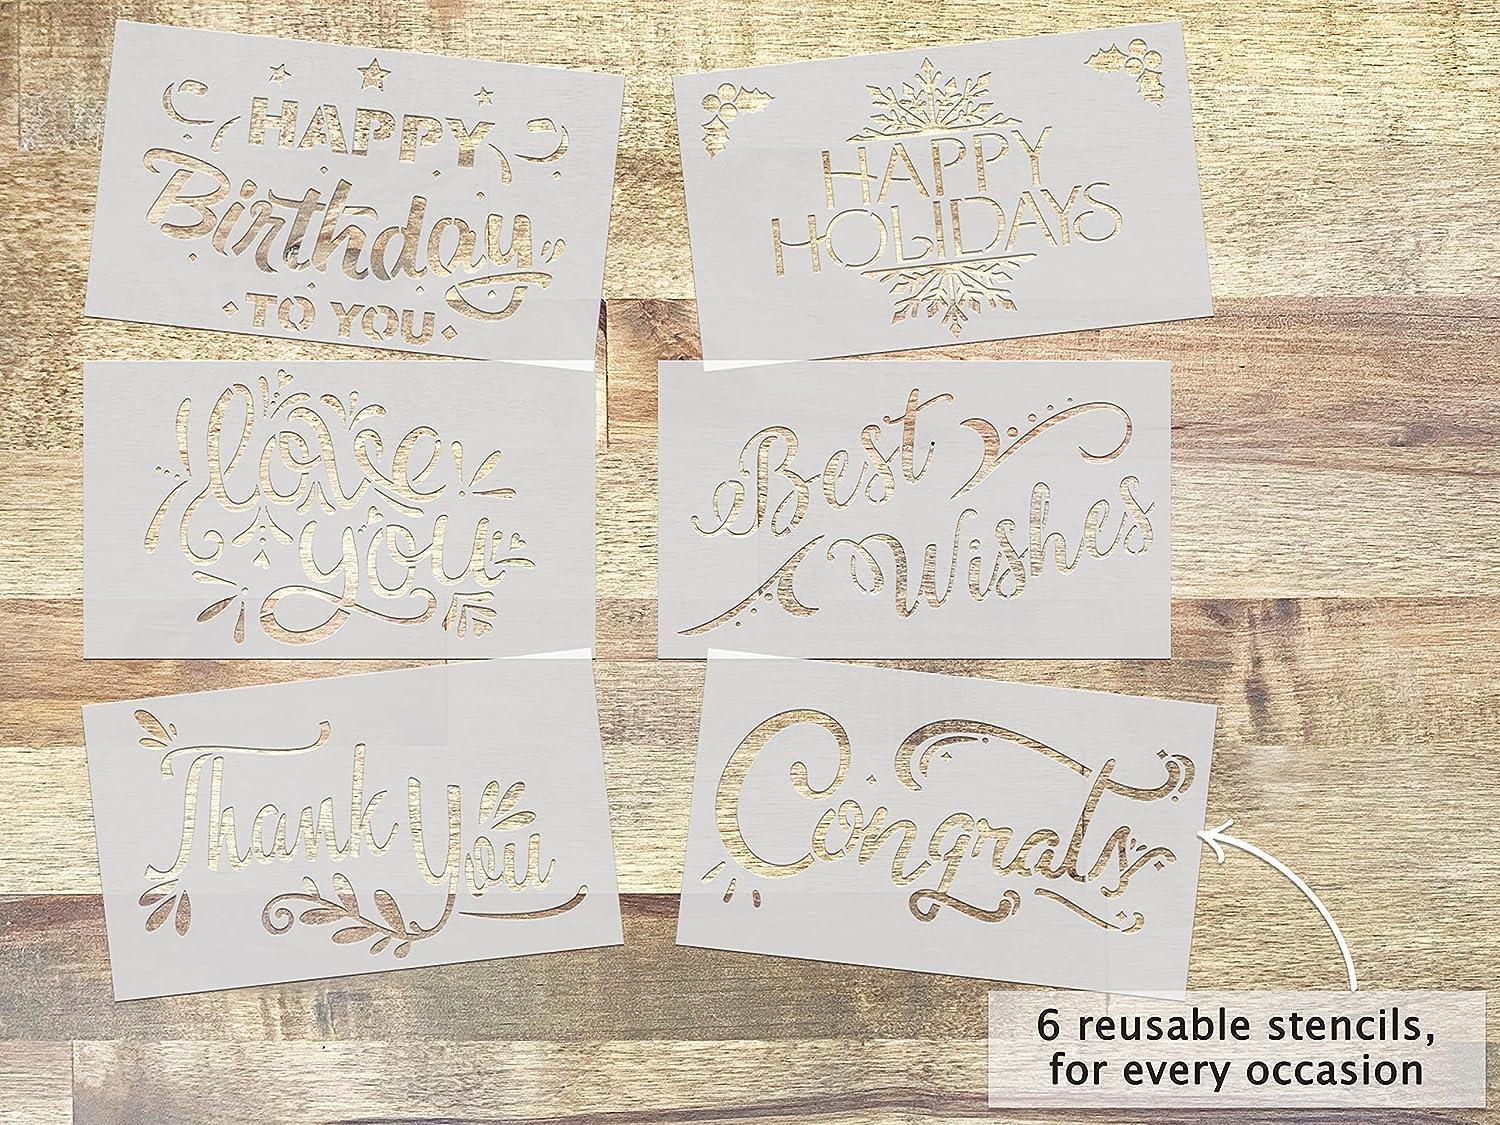 HAND INKED Card Making Kit. DIY Greeting Card Stencil Set. Stationary Box  with Card Making Supplies. Includes 50 Blank Cards, 50 Envelopes, 6  Stencils and 5 Brush Pens